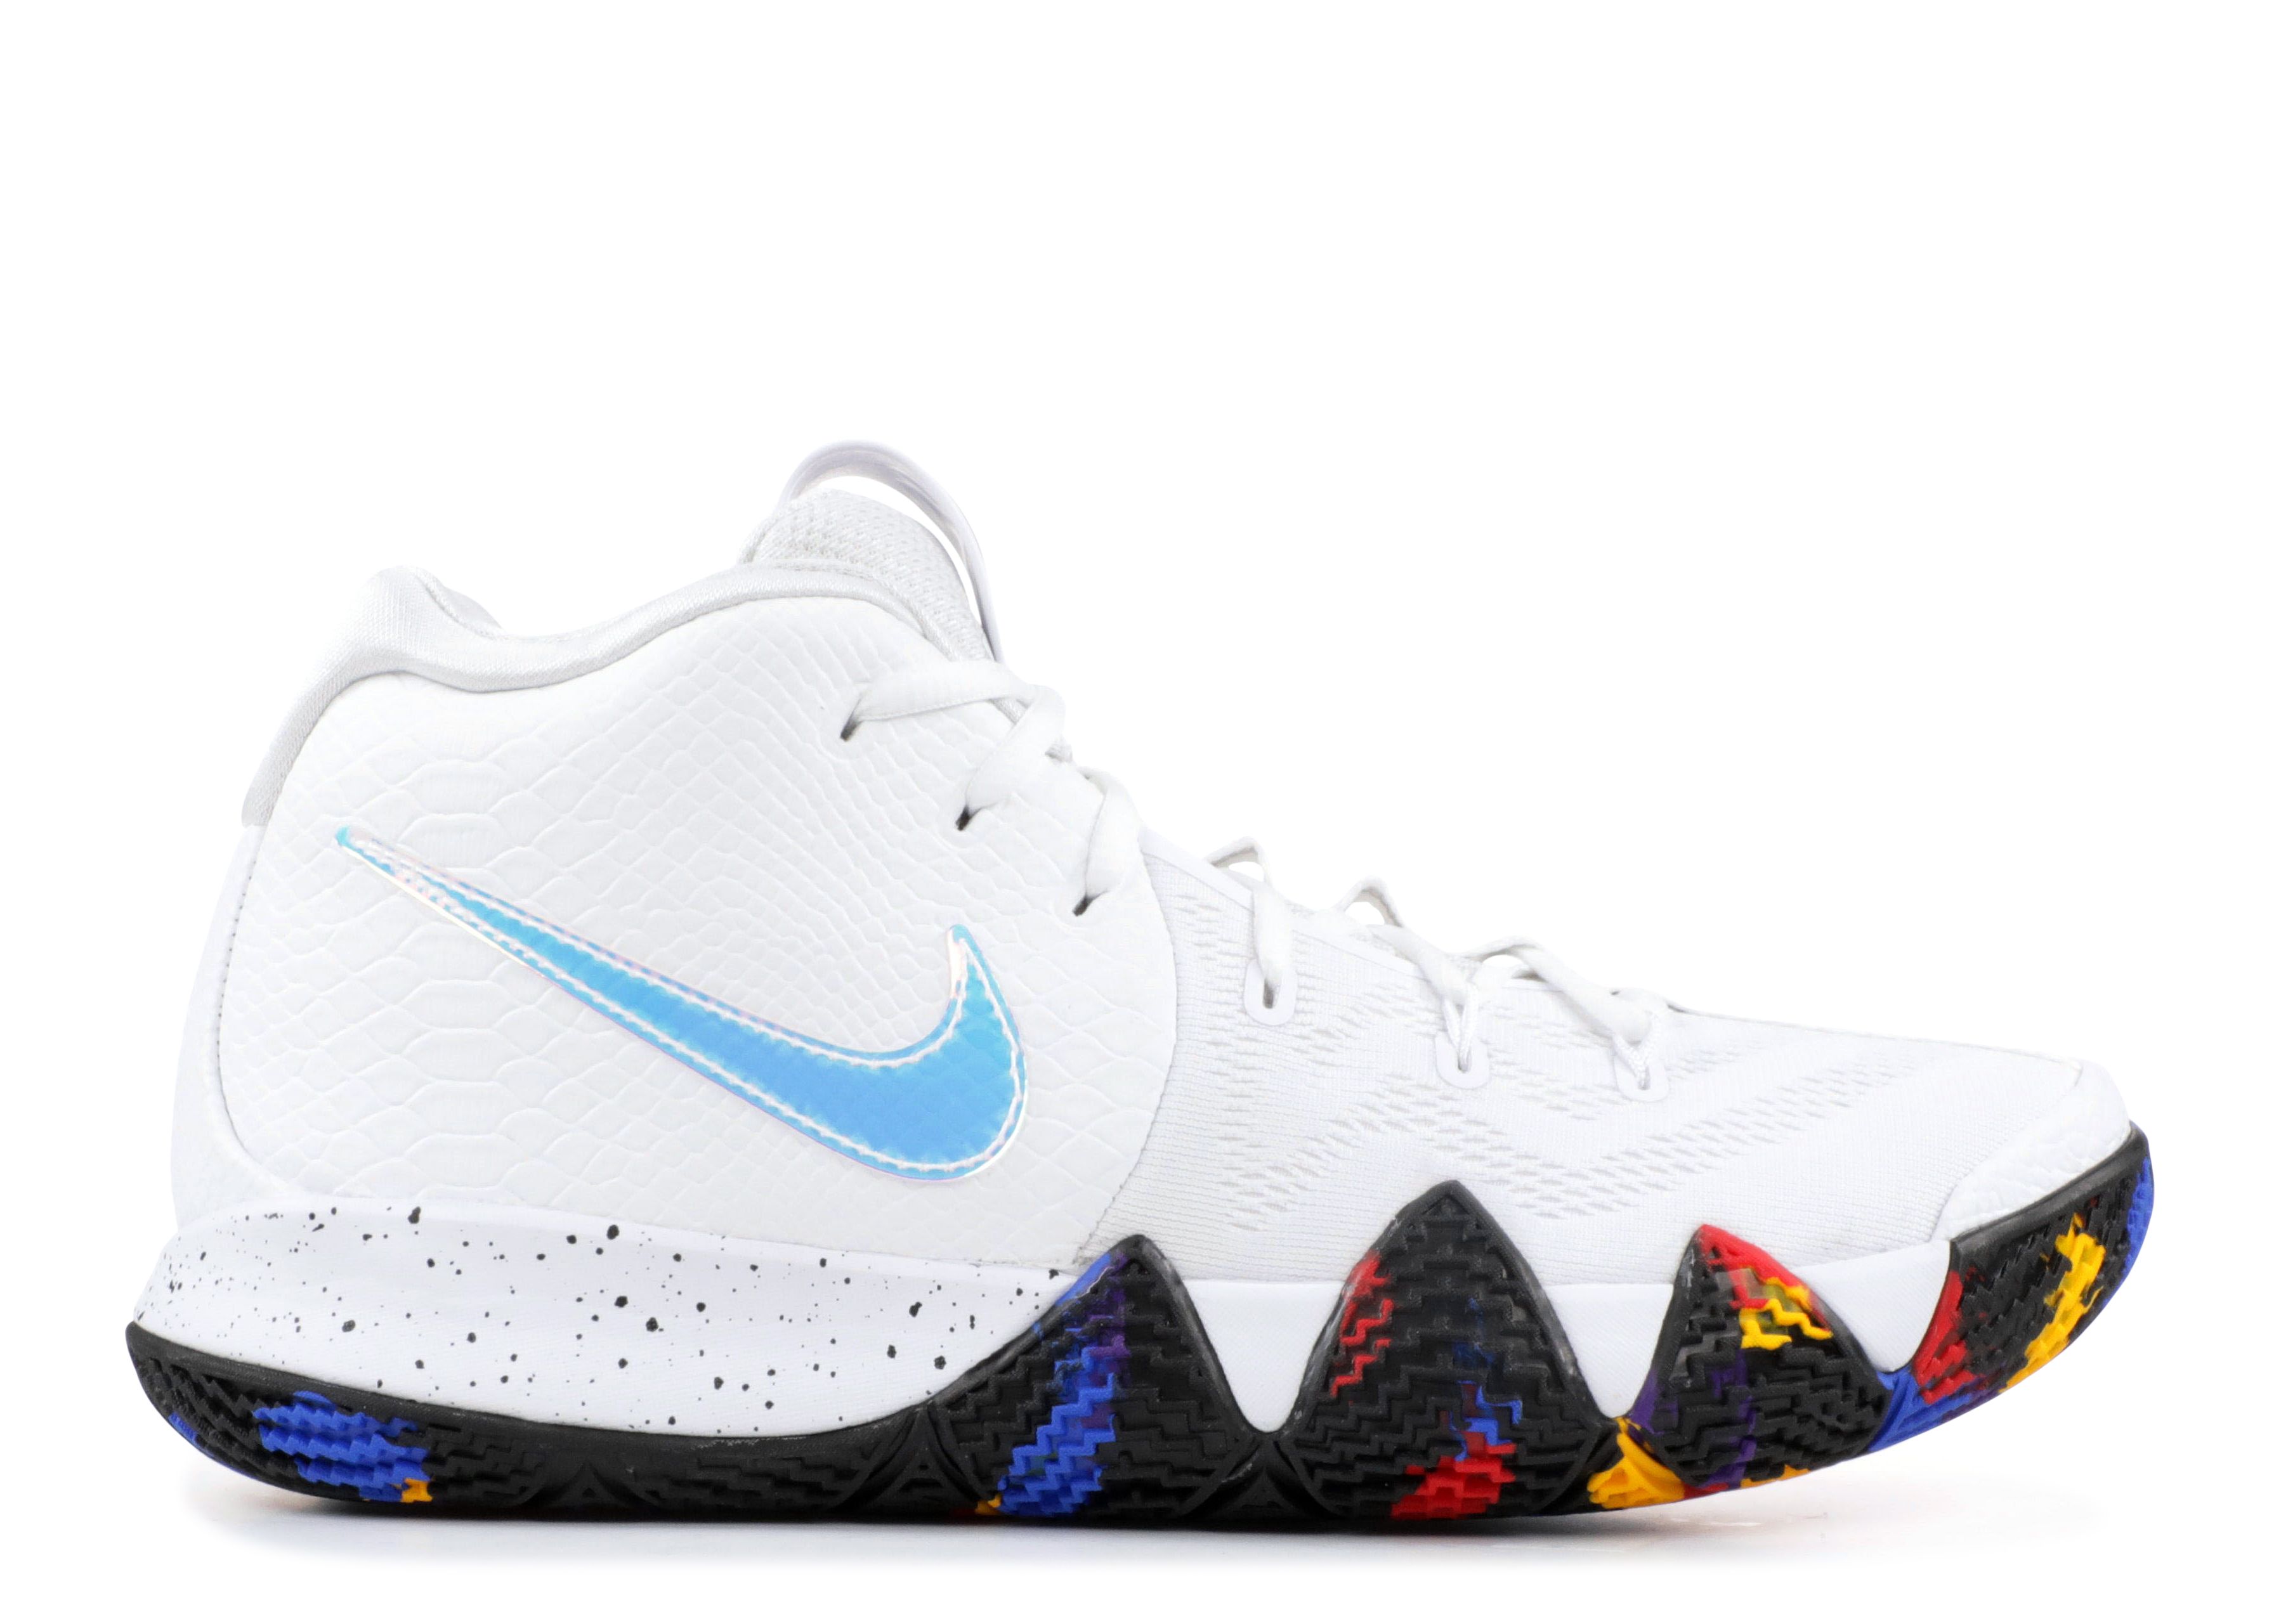 kyrie 4 ncaa march madness